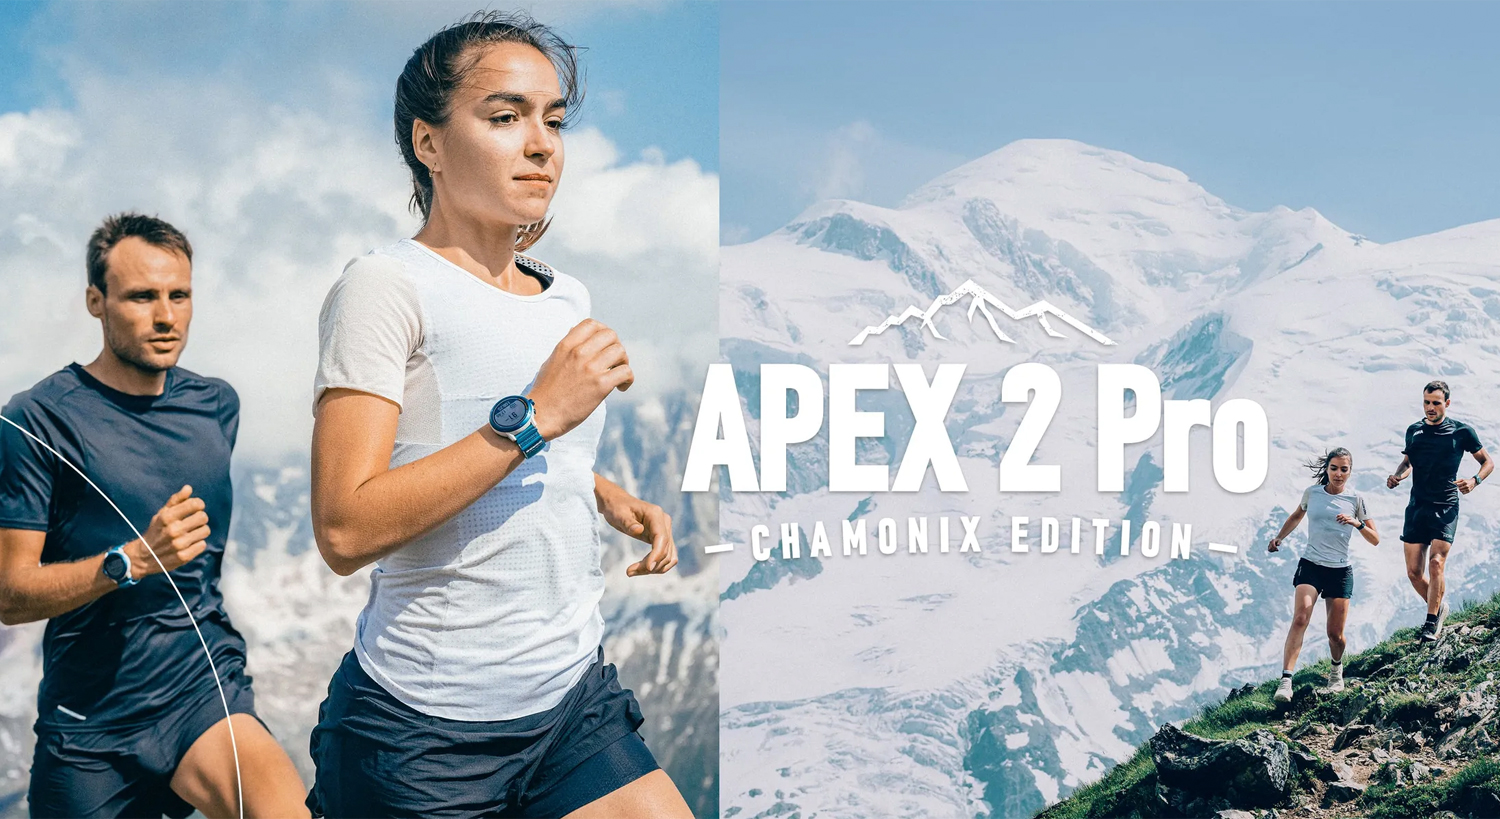 Coros Drops Apex 2 Pro Chamonix Edition, Just in Time for UTMB